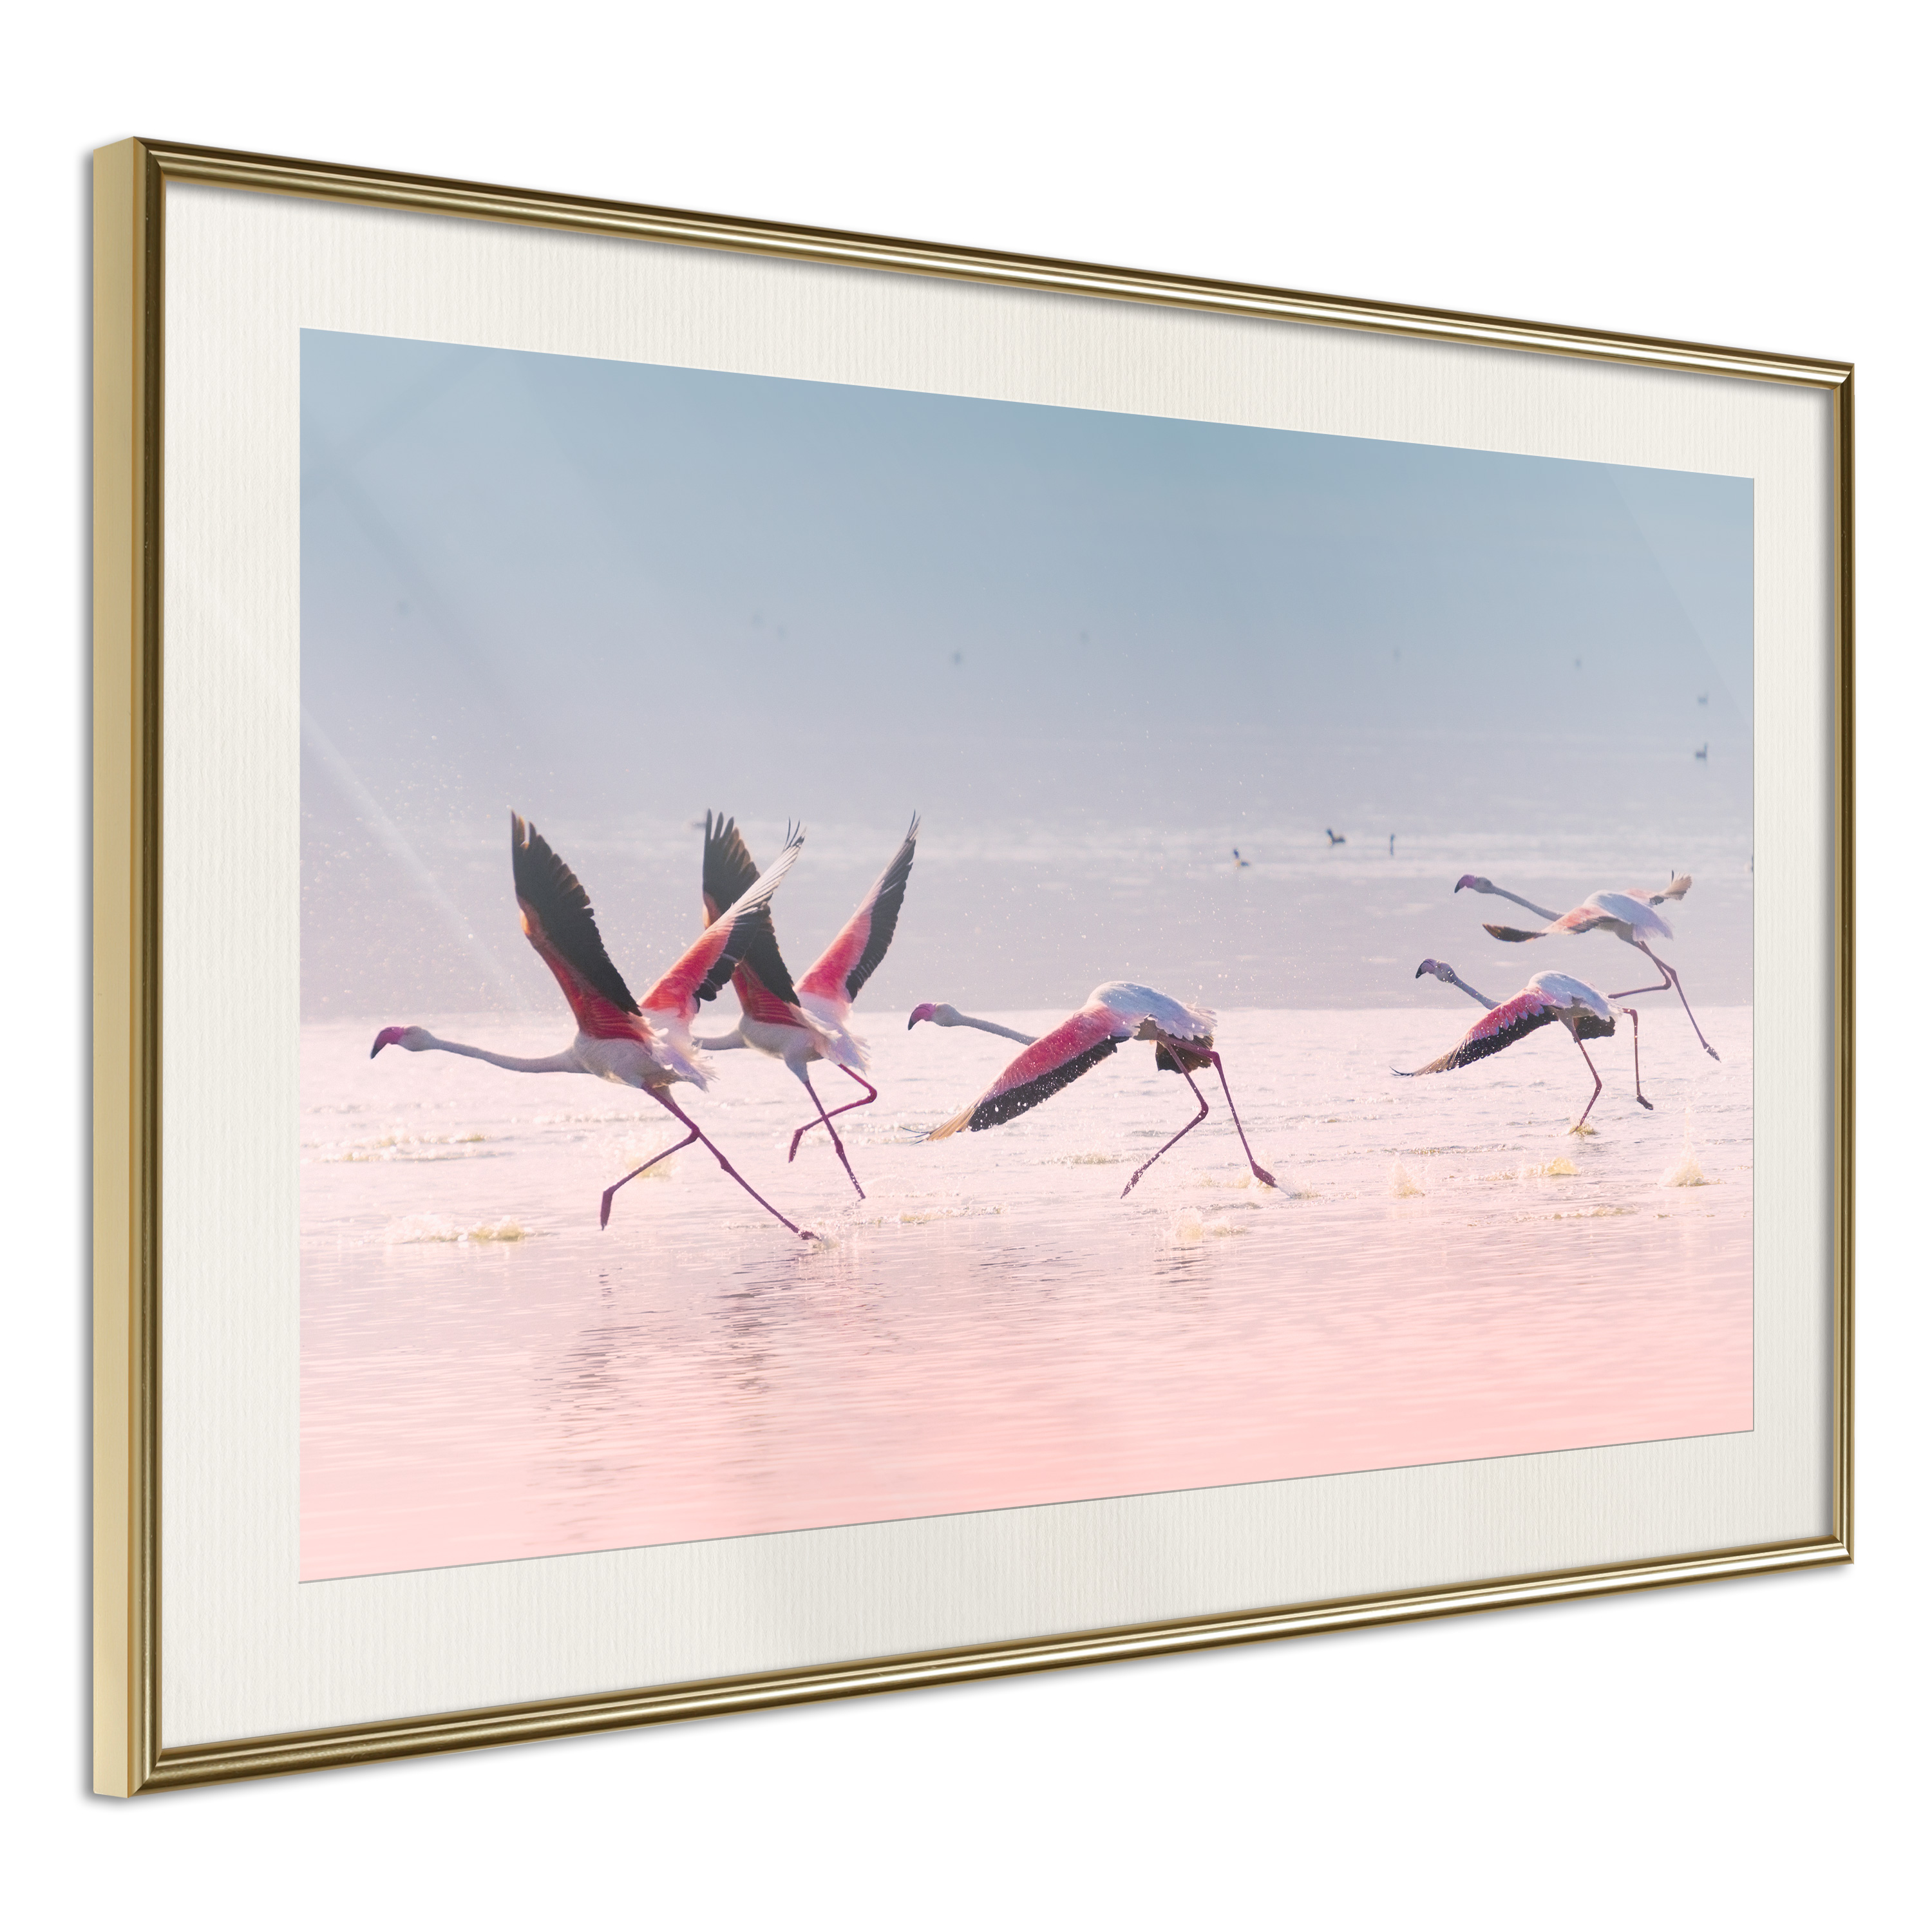 Poster - Flamingos Breaking into a Flight - 30x20